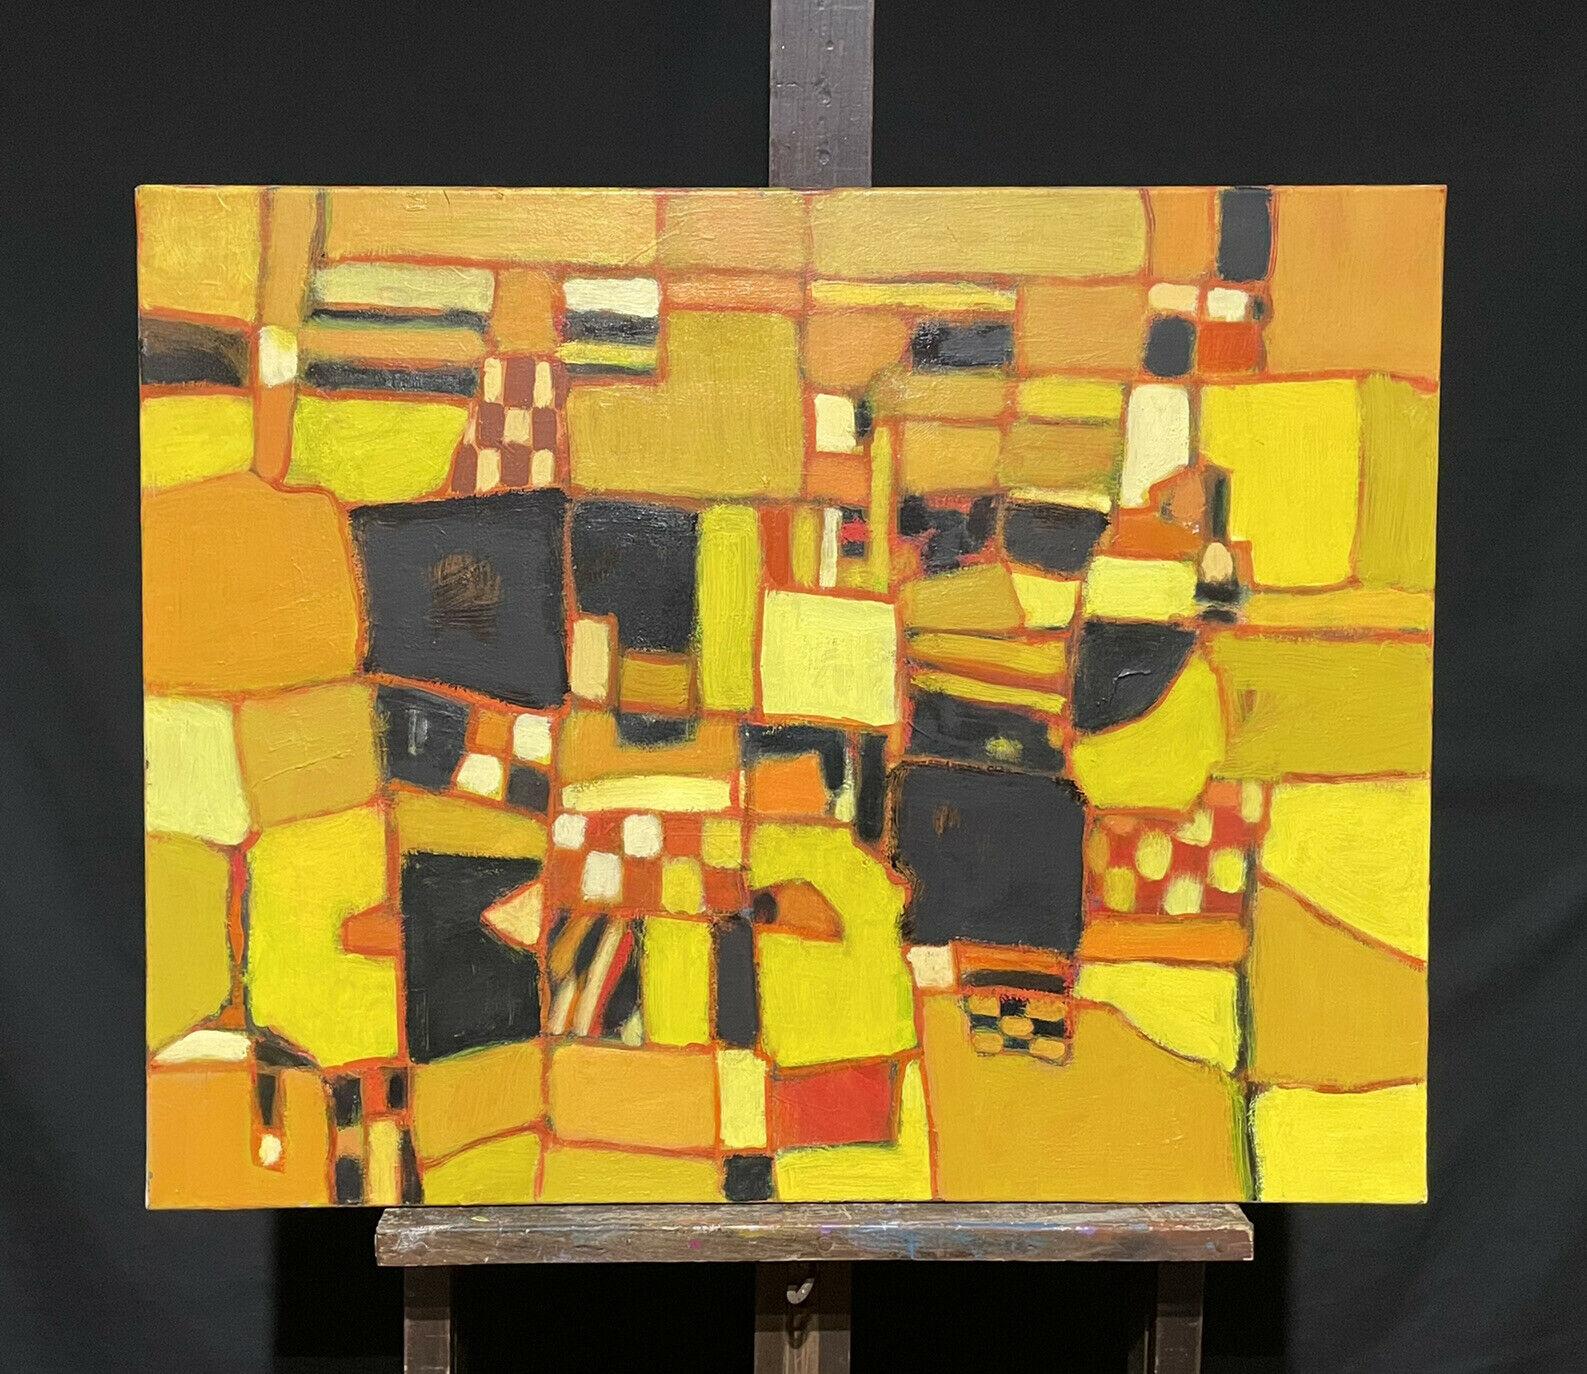 FRENCH CONTEMPORARY ABSTRACT CUBIST PAINTING VERY LARGE CANVAS - Painting by R.Leroy